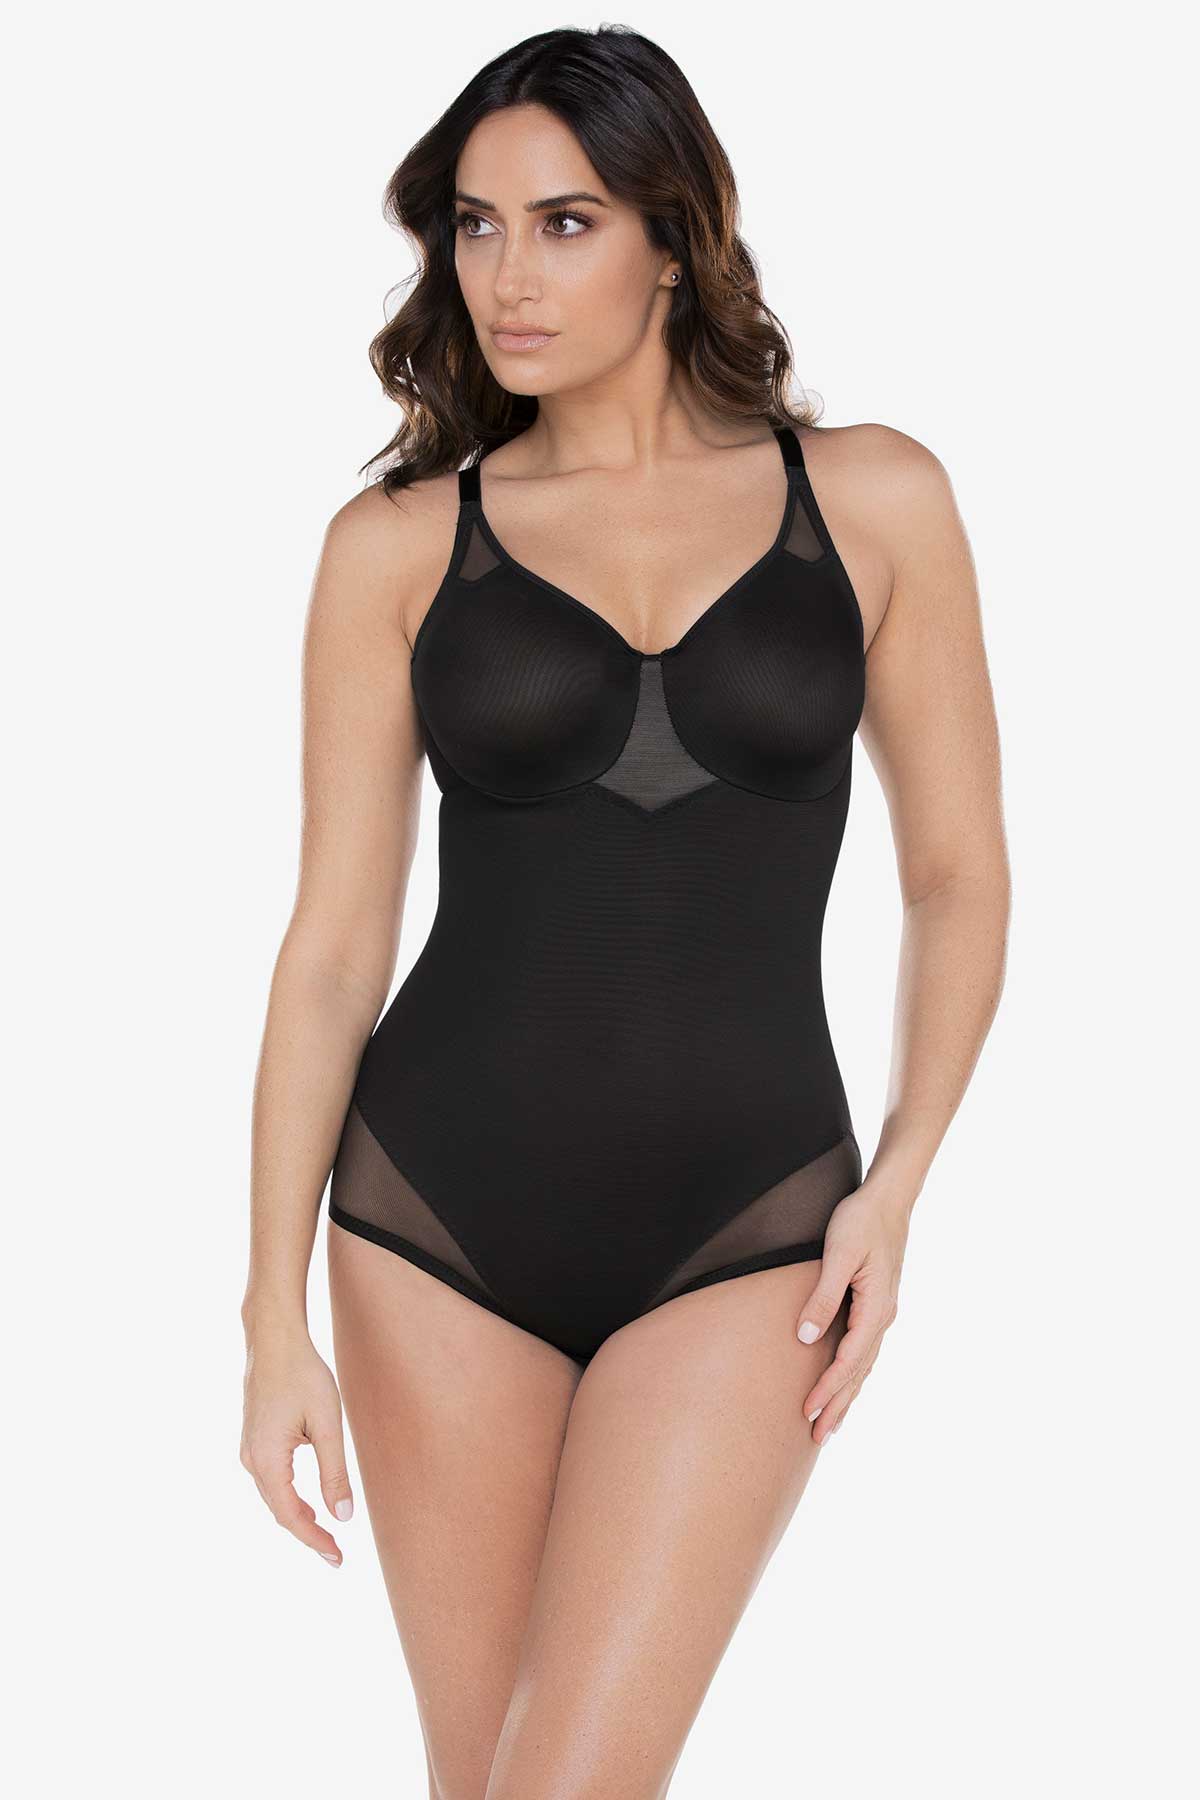 Fit Frances Thigh Shaper - Perfect Control and Comfort - Shape